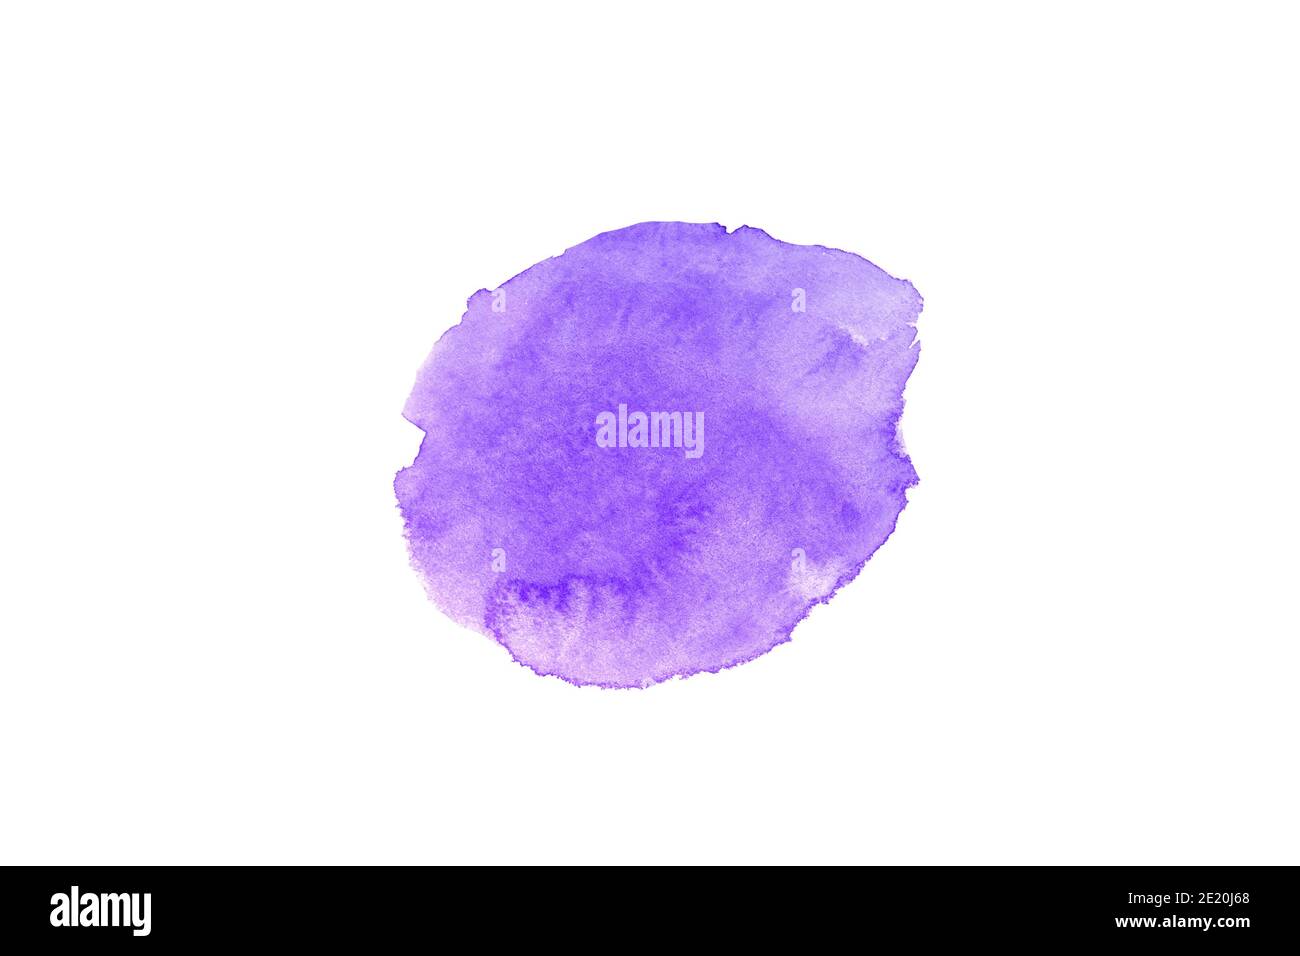 Purple watercolour or ink stain with blurred edges of watercolor paint on white Stock Photo